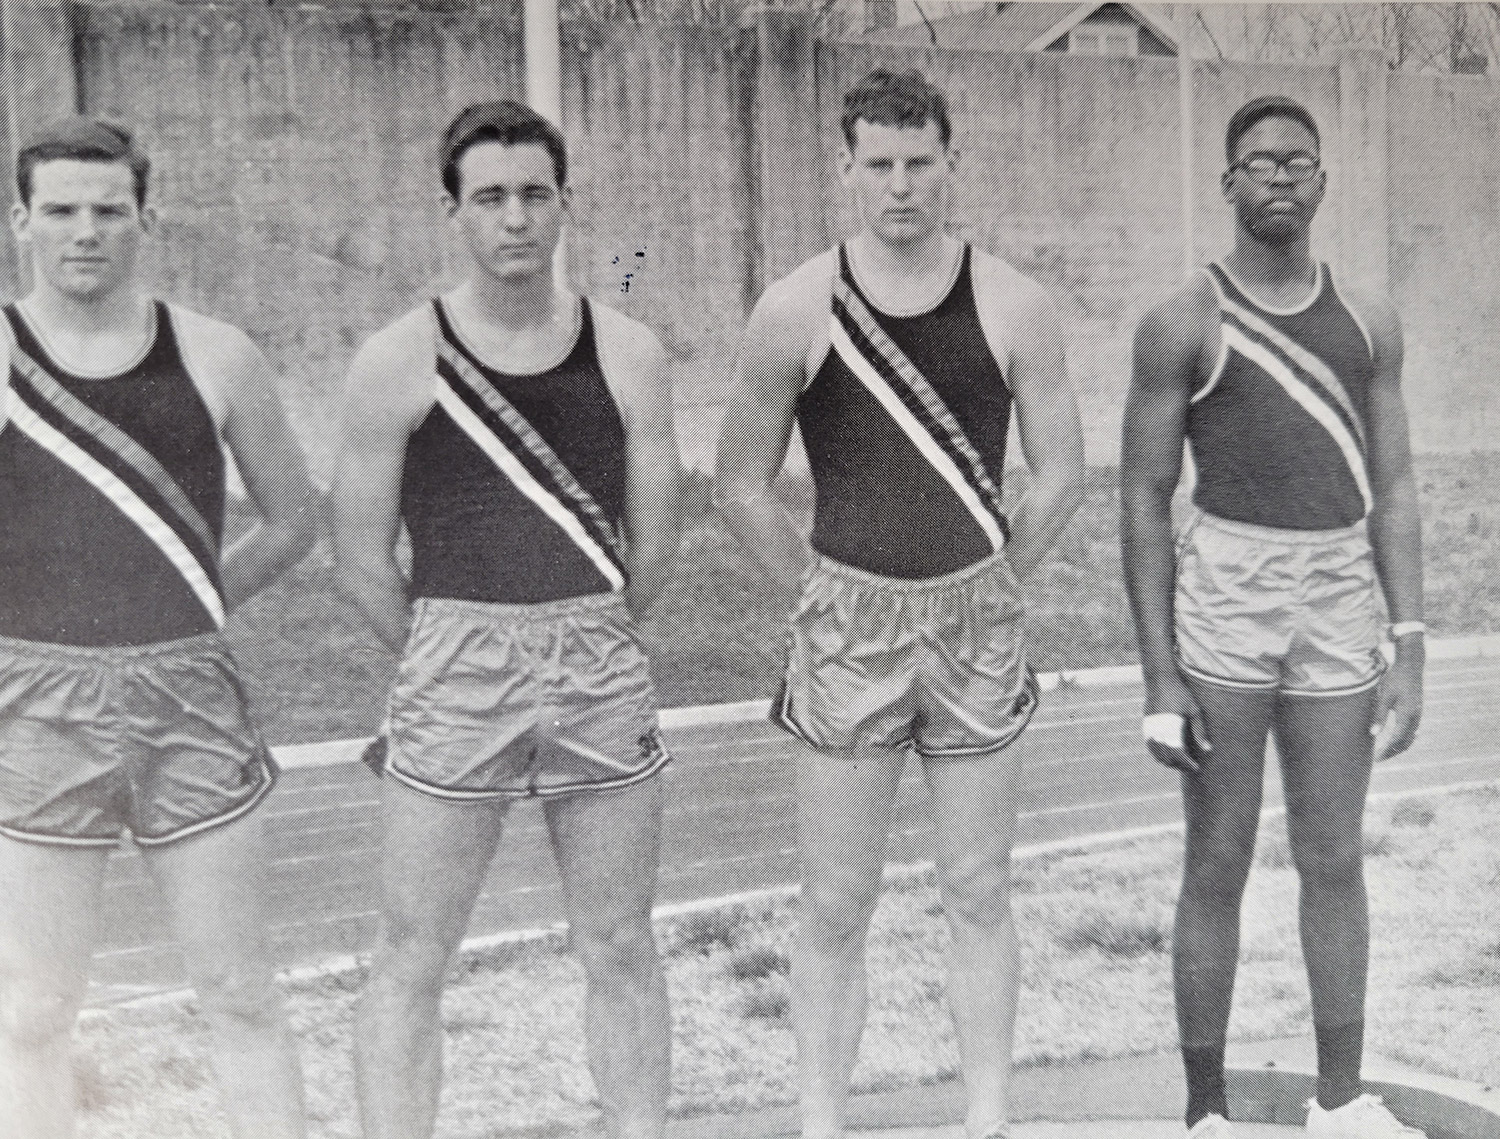 Three white young men and one African American young man in track uniforms